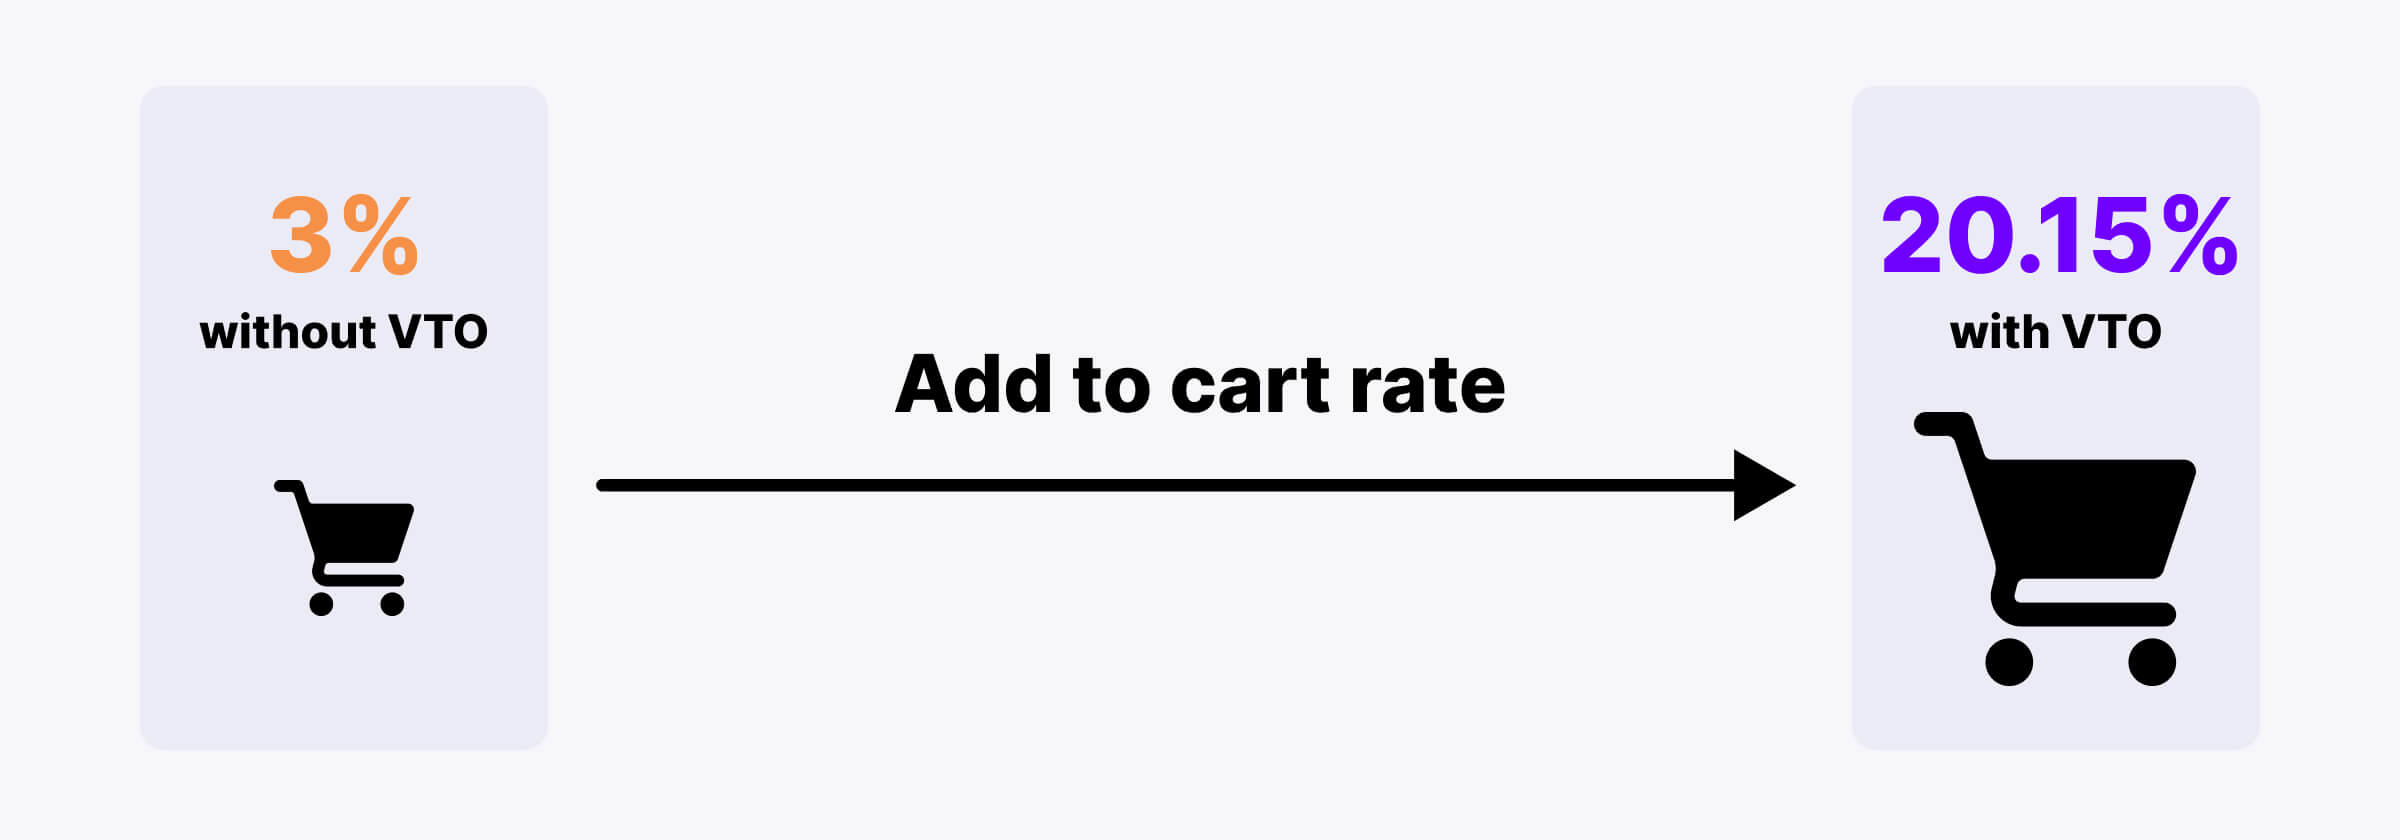 img-article-VTO-Add-to-cart-rate@2x-1